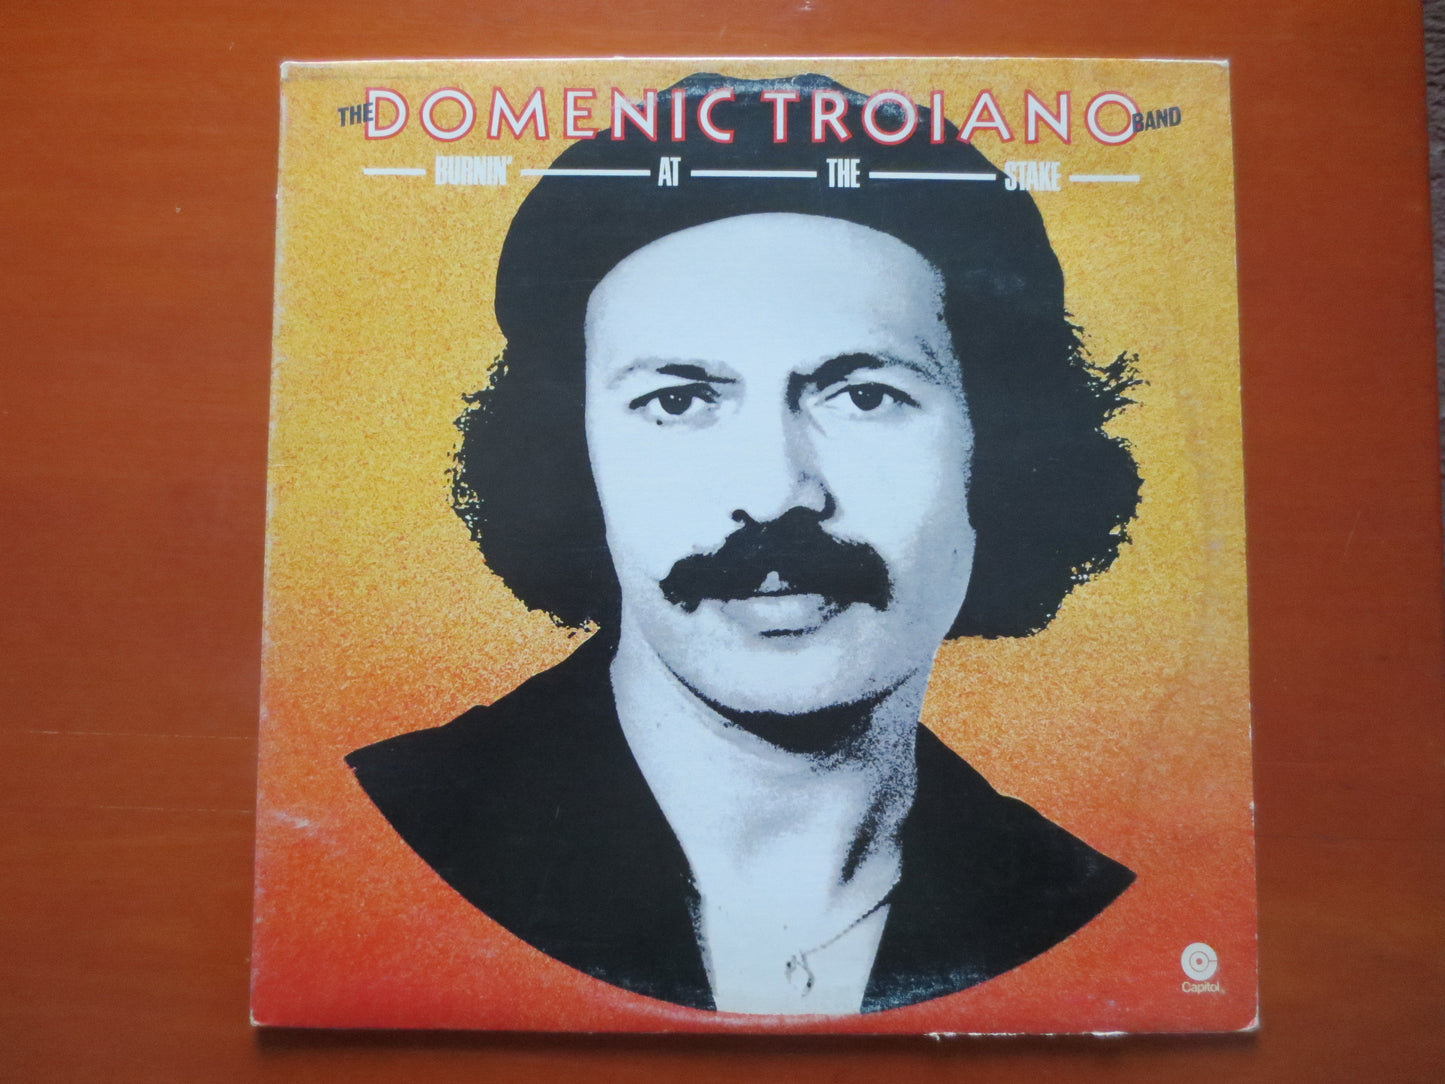 DOMINIC TROIANO, Burnin' at the Stake, Jazz Record, Jazz Rock Album, Jazz Album, Vintage Rock Album, Vinyl, 1977 Records